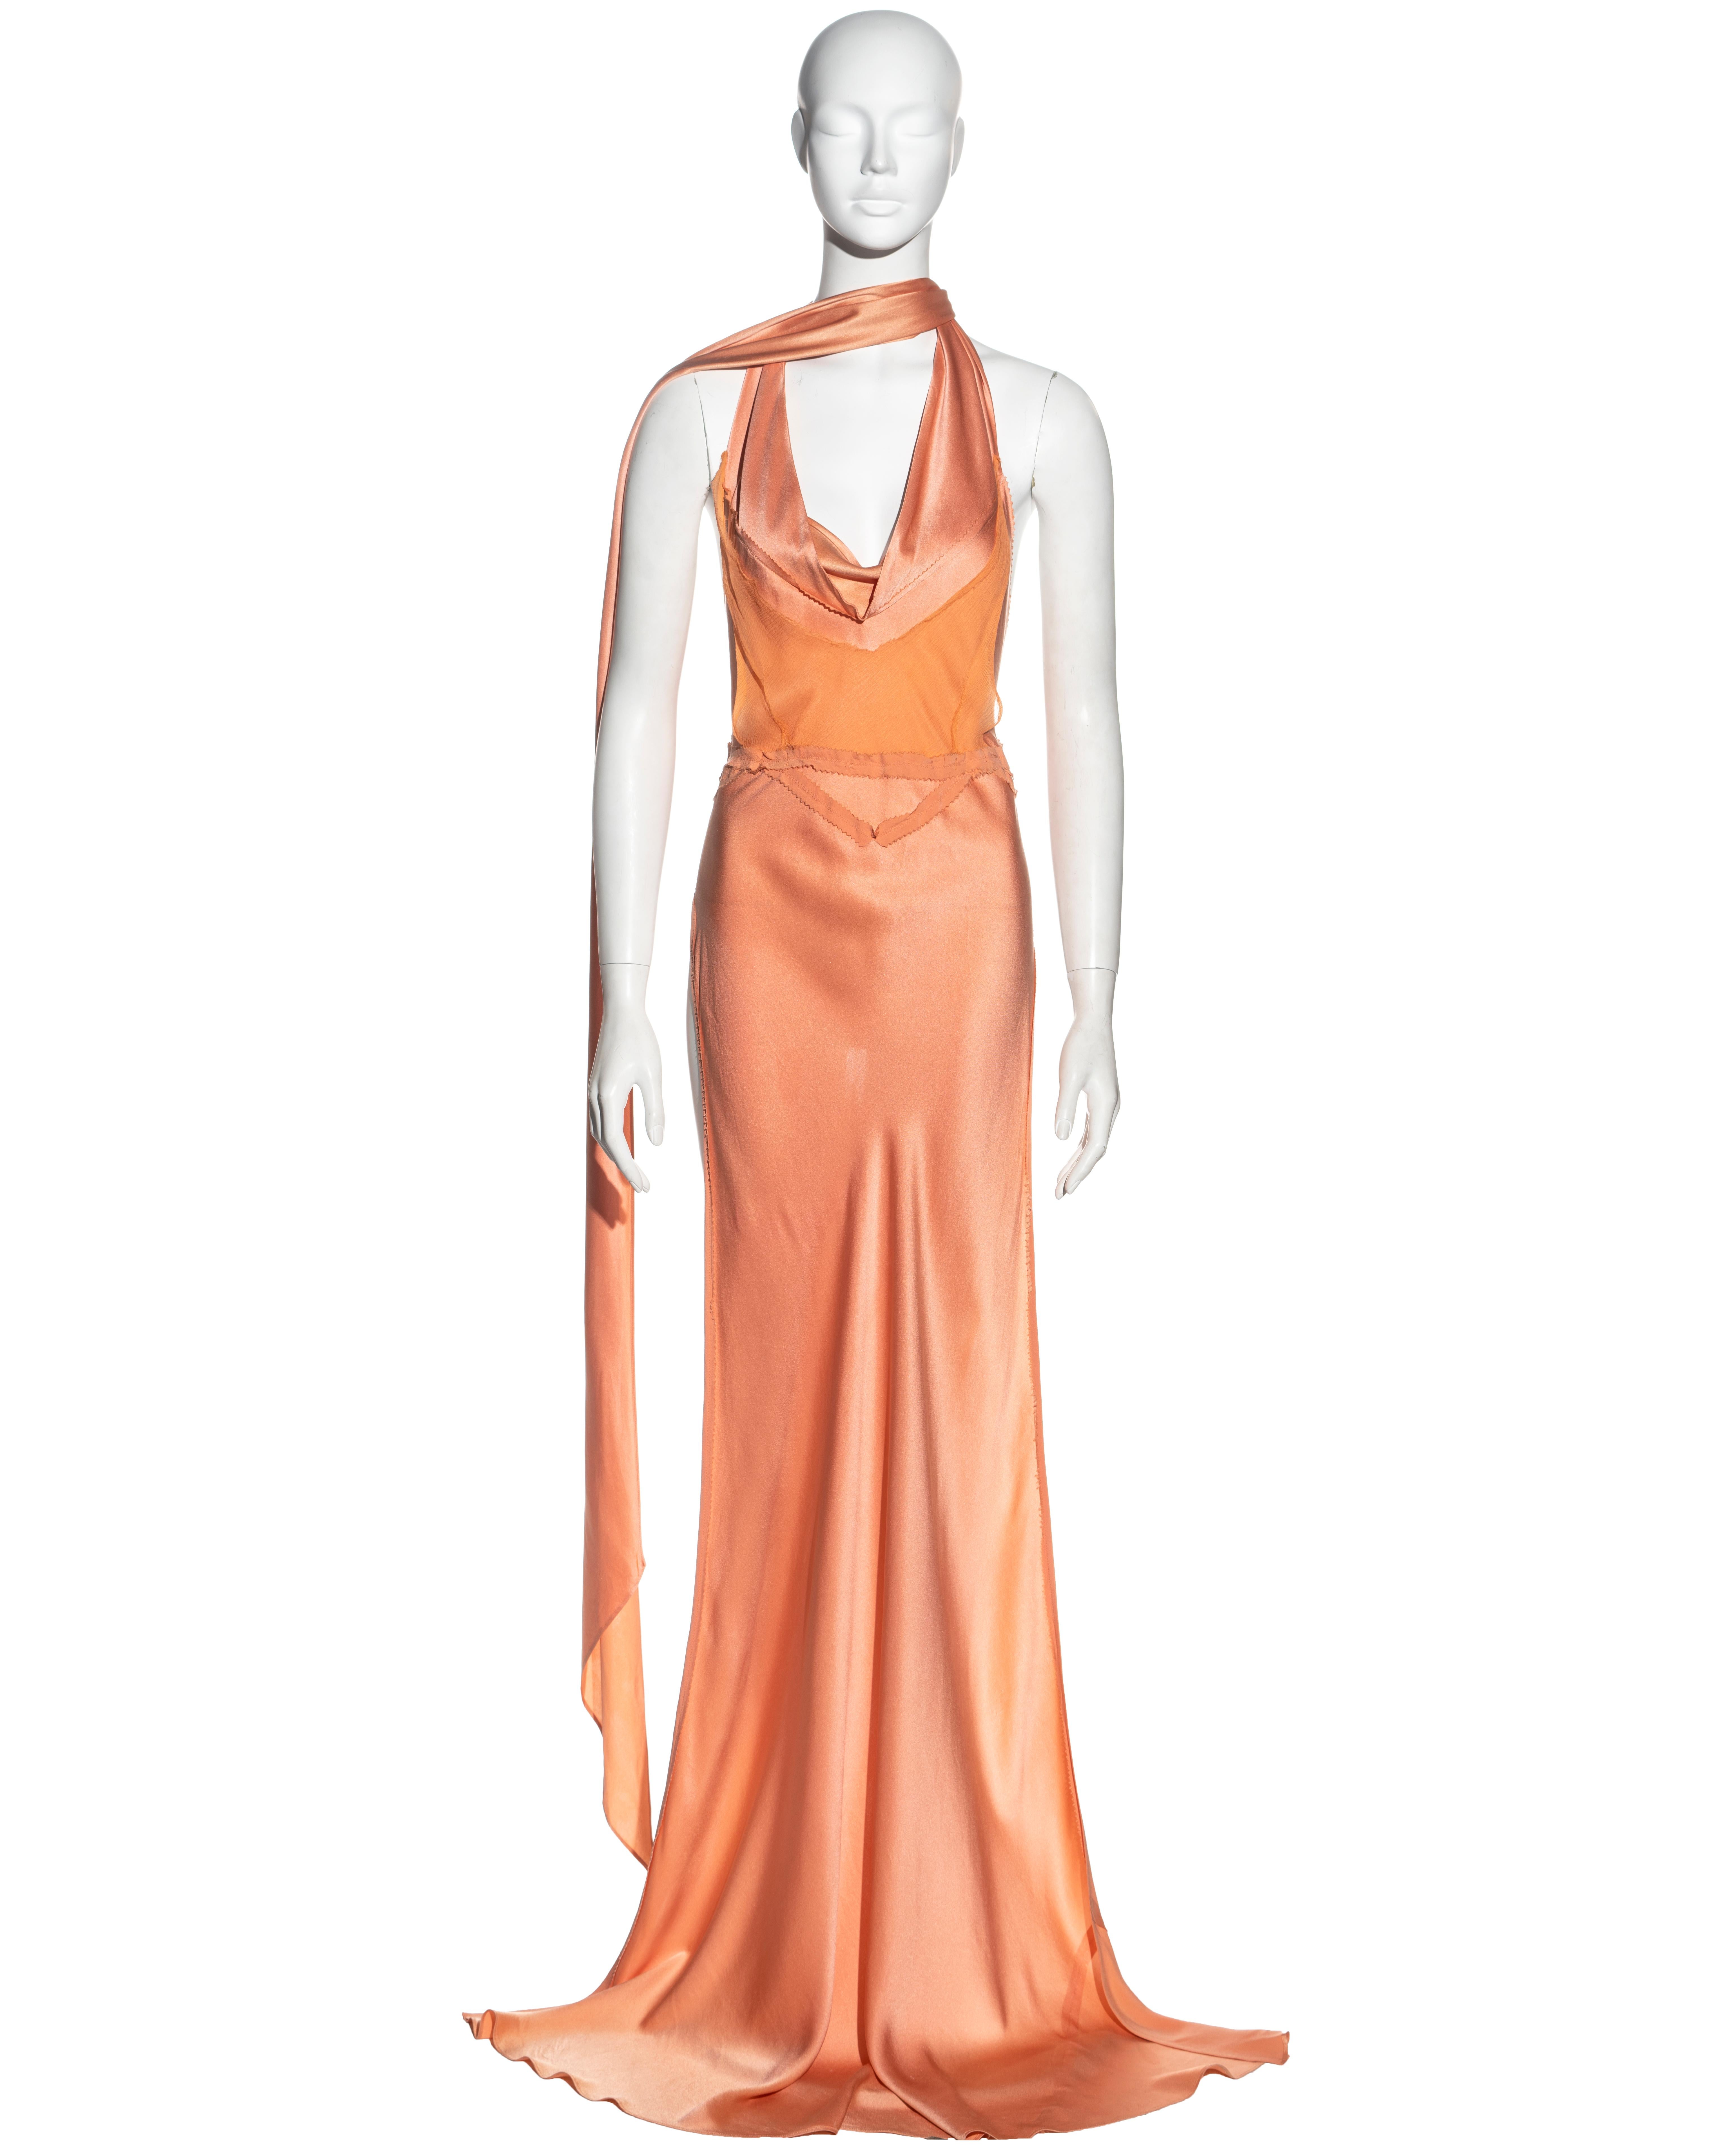 ▪ Jean Paul Gaultier evening maxi top / dress
▪ Sold by One of a Kind Archive
▪ Constructed from peach bias-cut silk 
▪ Silk chiffon insert with inverted pinked seam detail 
▪ Cowl neck with two extra long ties 
▪ Completely open back with two ties